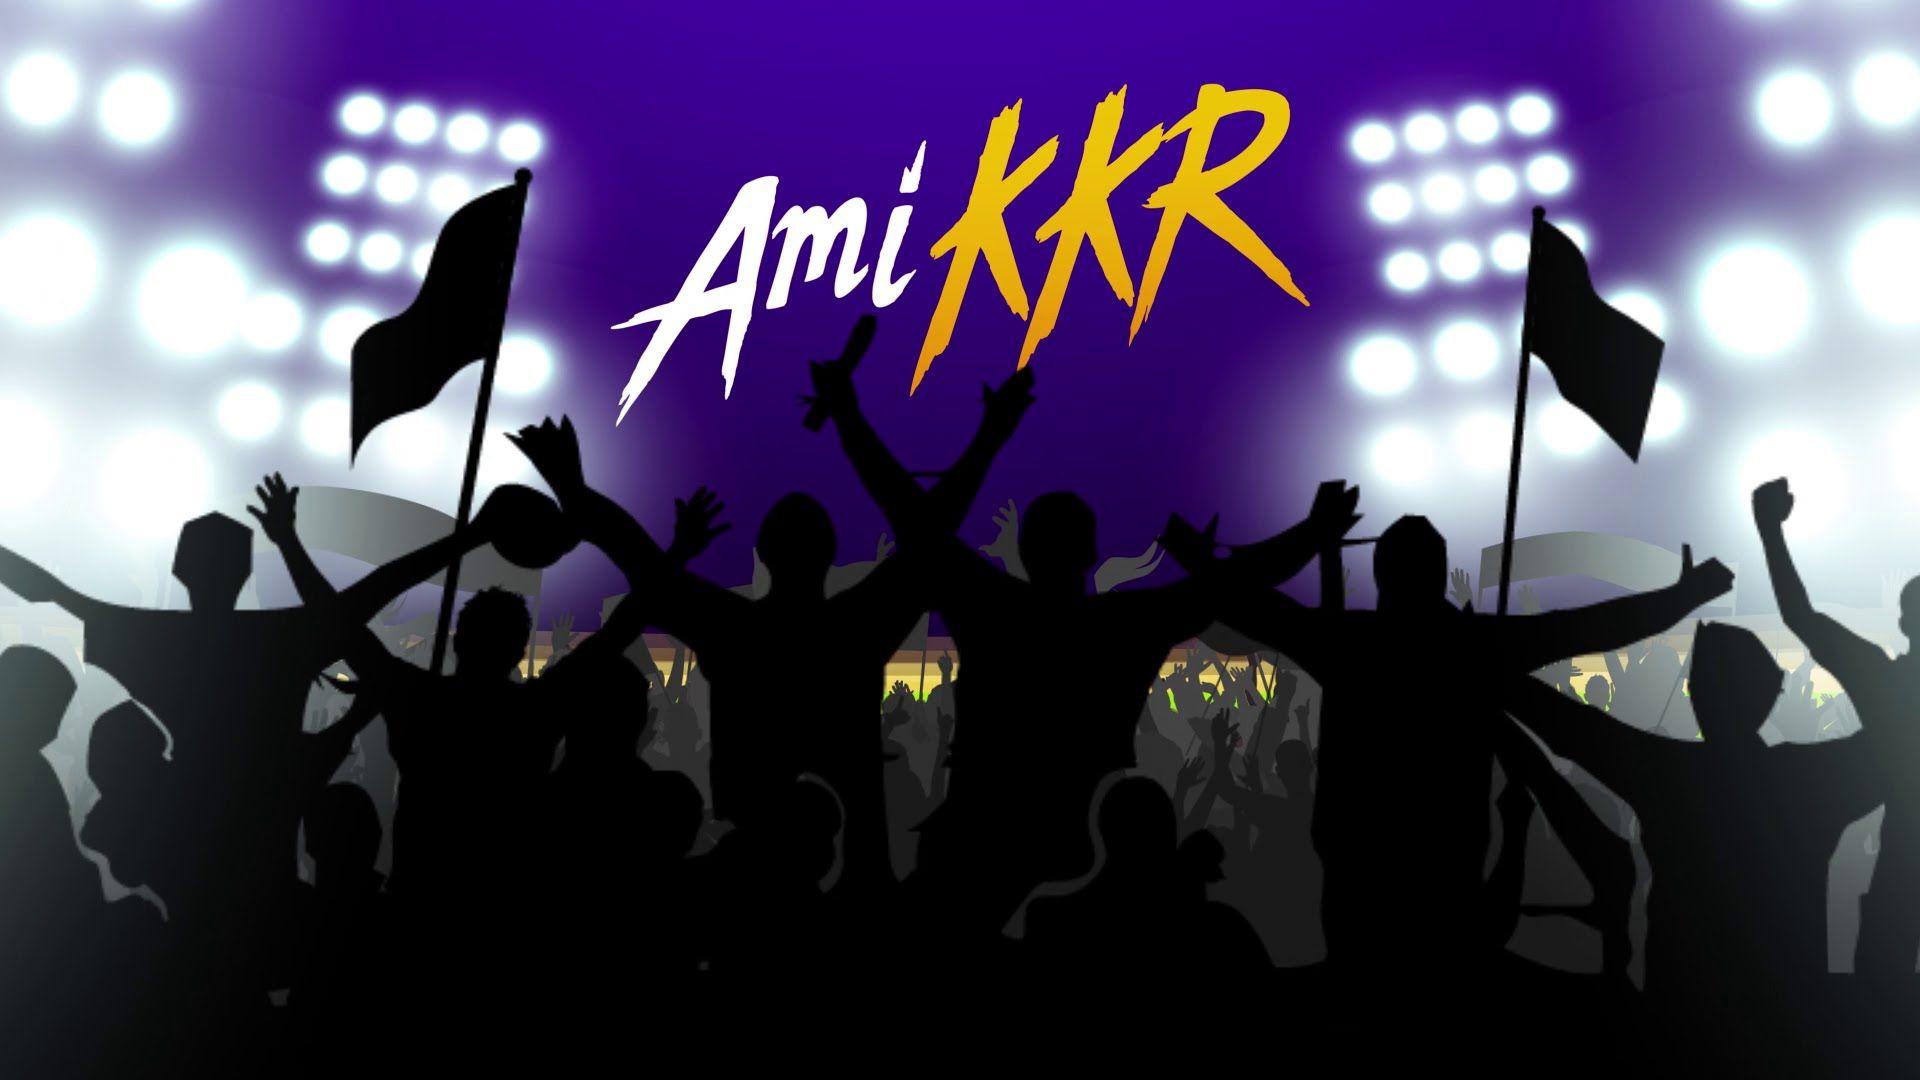 Ami KKR now and forever